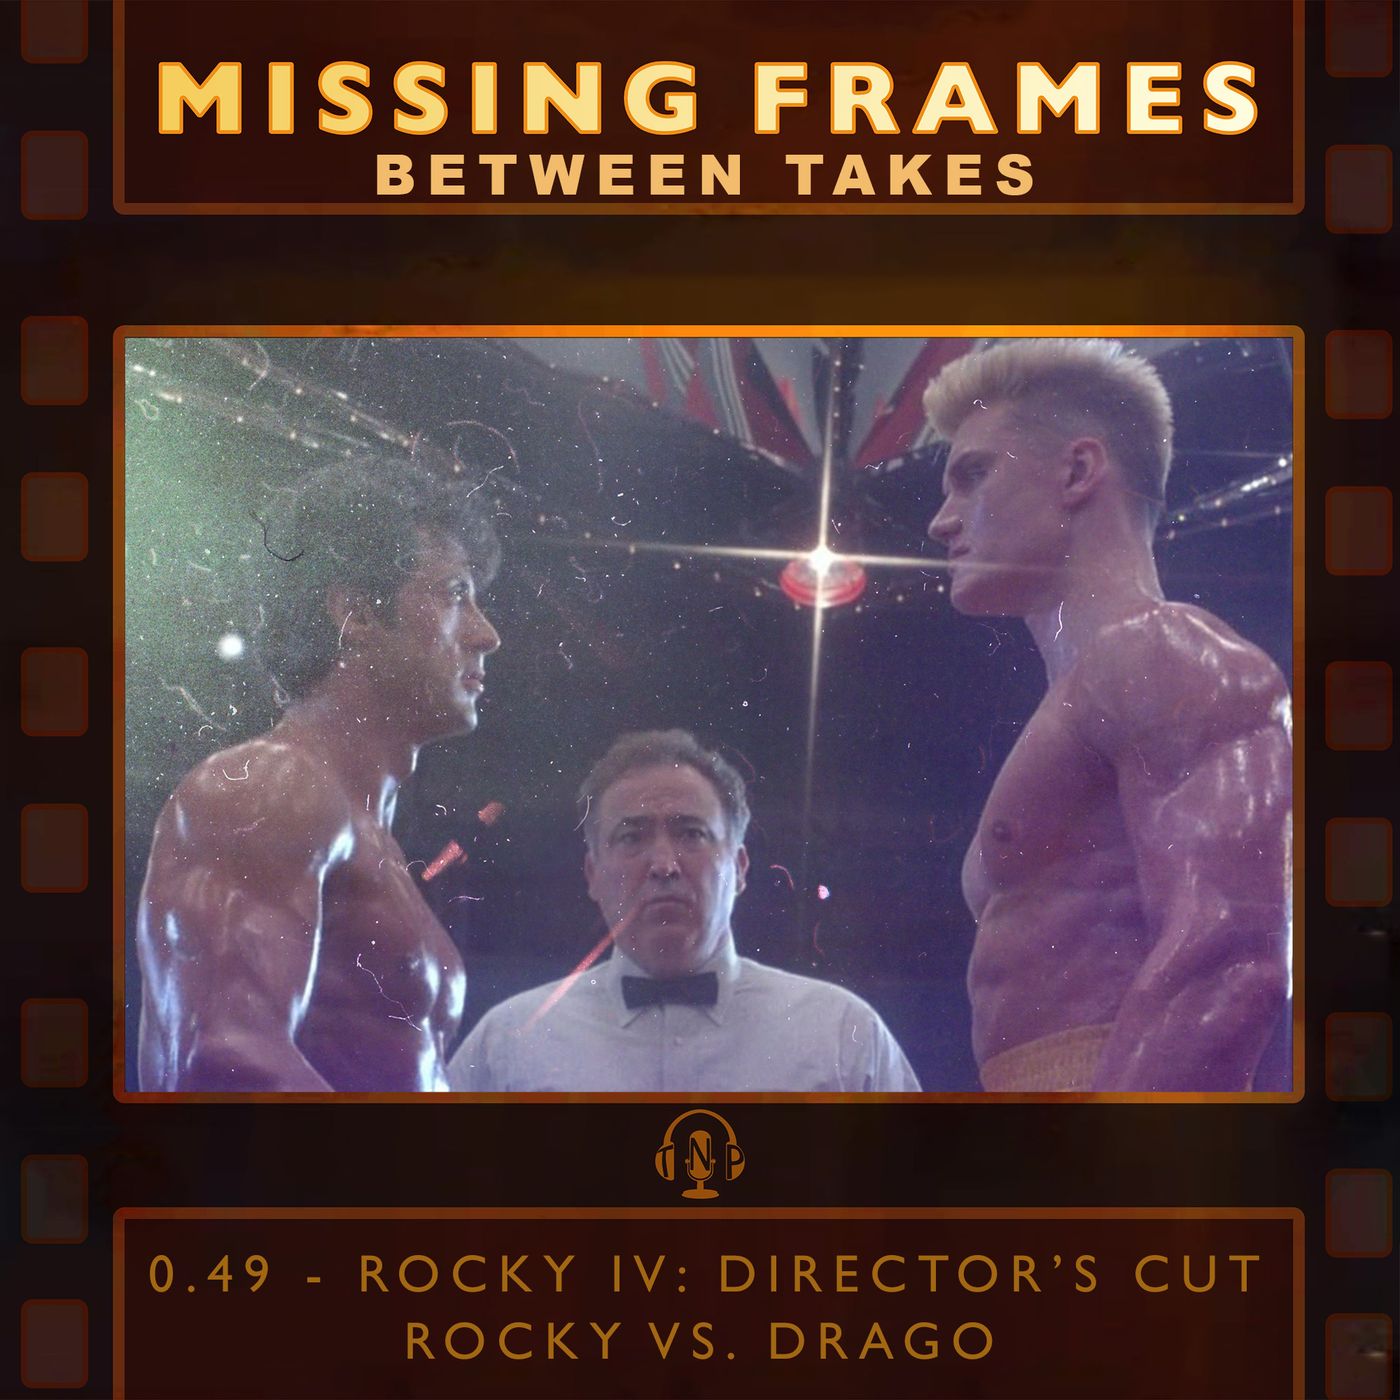 Between Takes 0.49 - Rocky IV: Director’s Cut - Rocky Vs. Drago